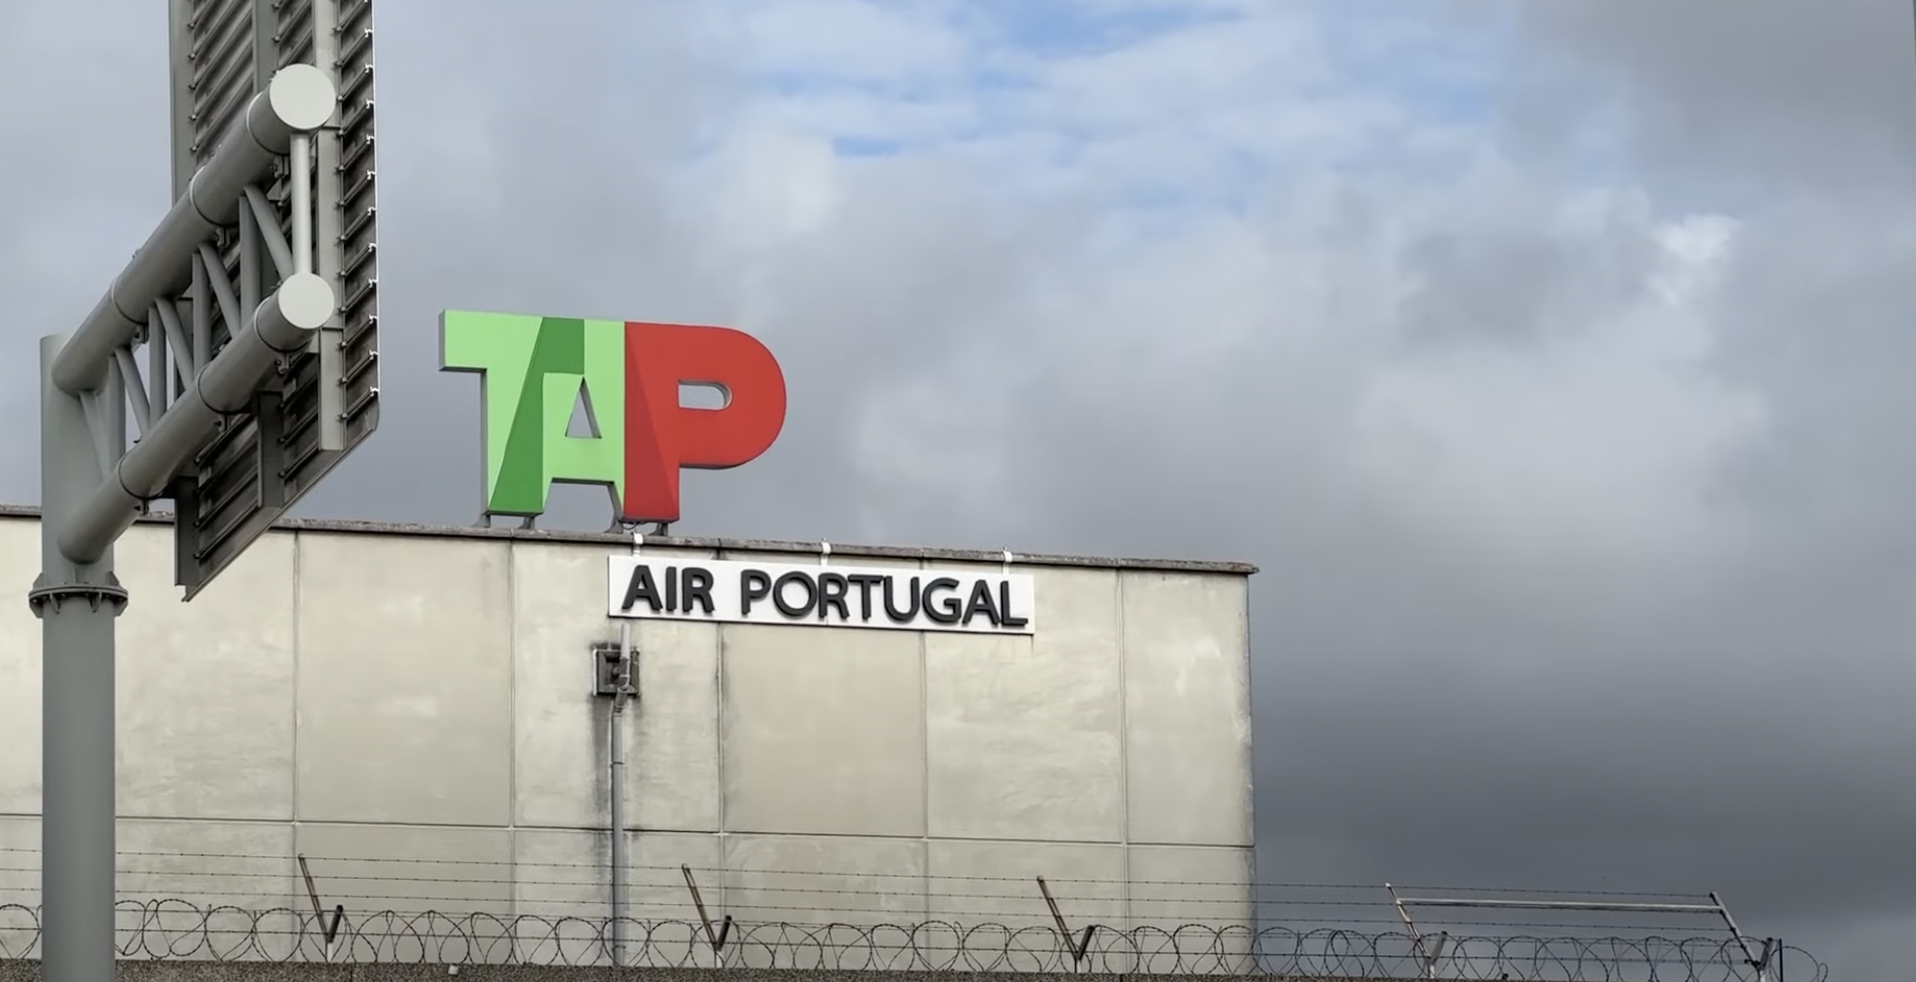 tap air portugal office front